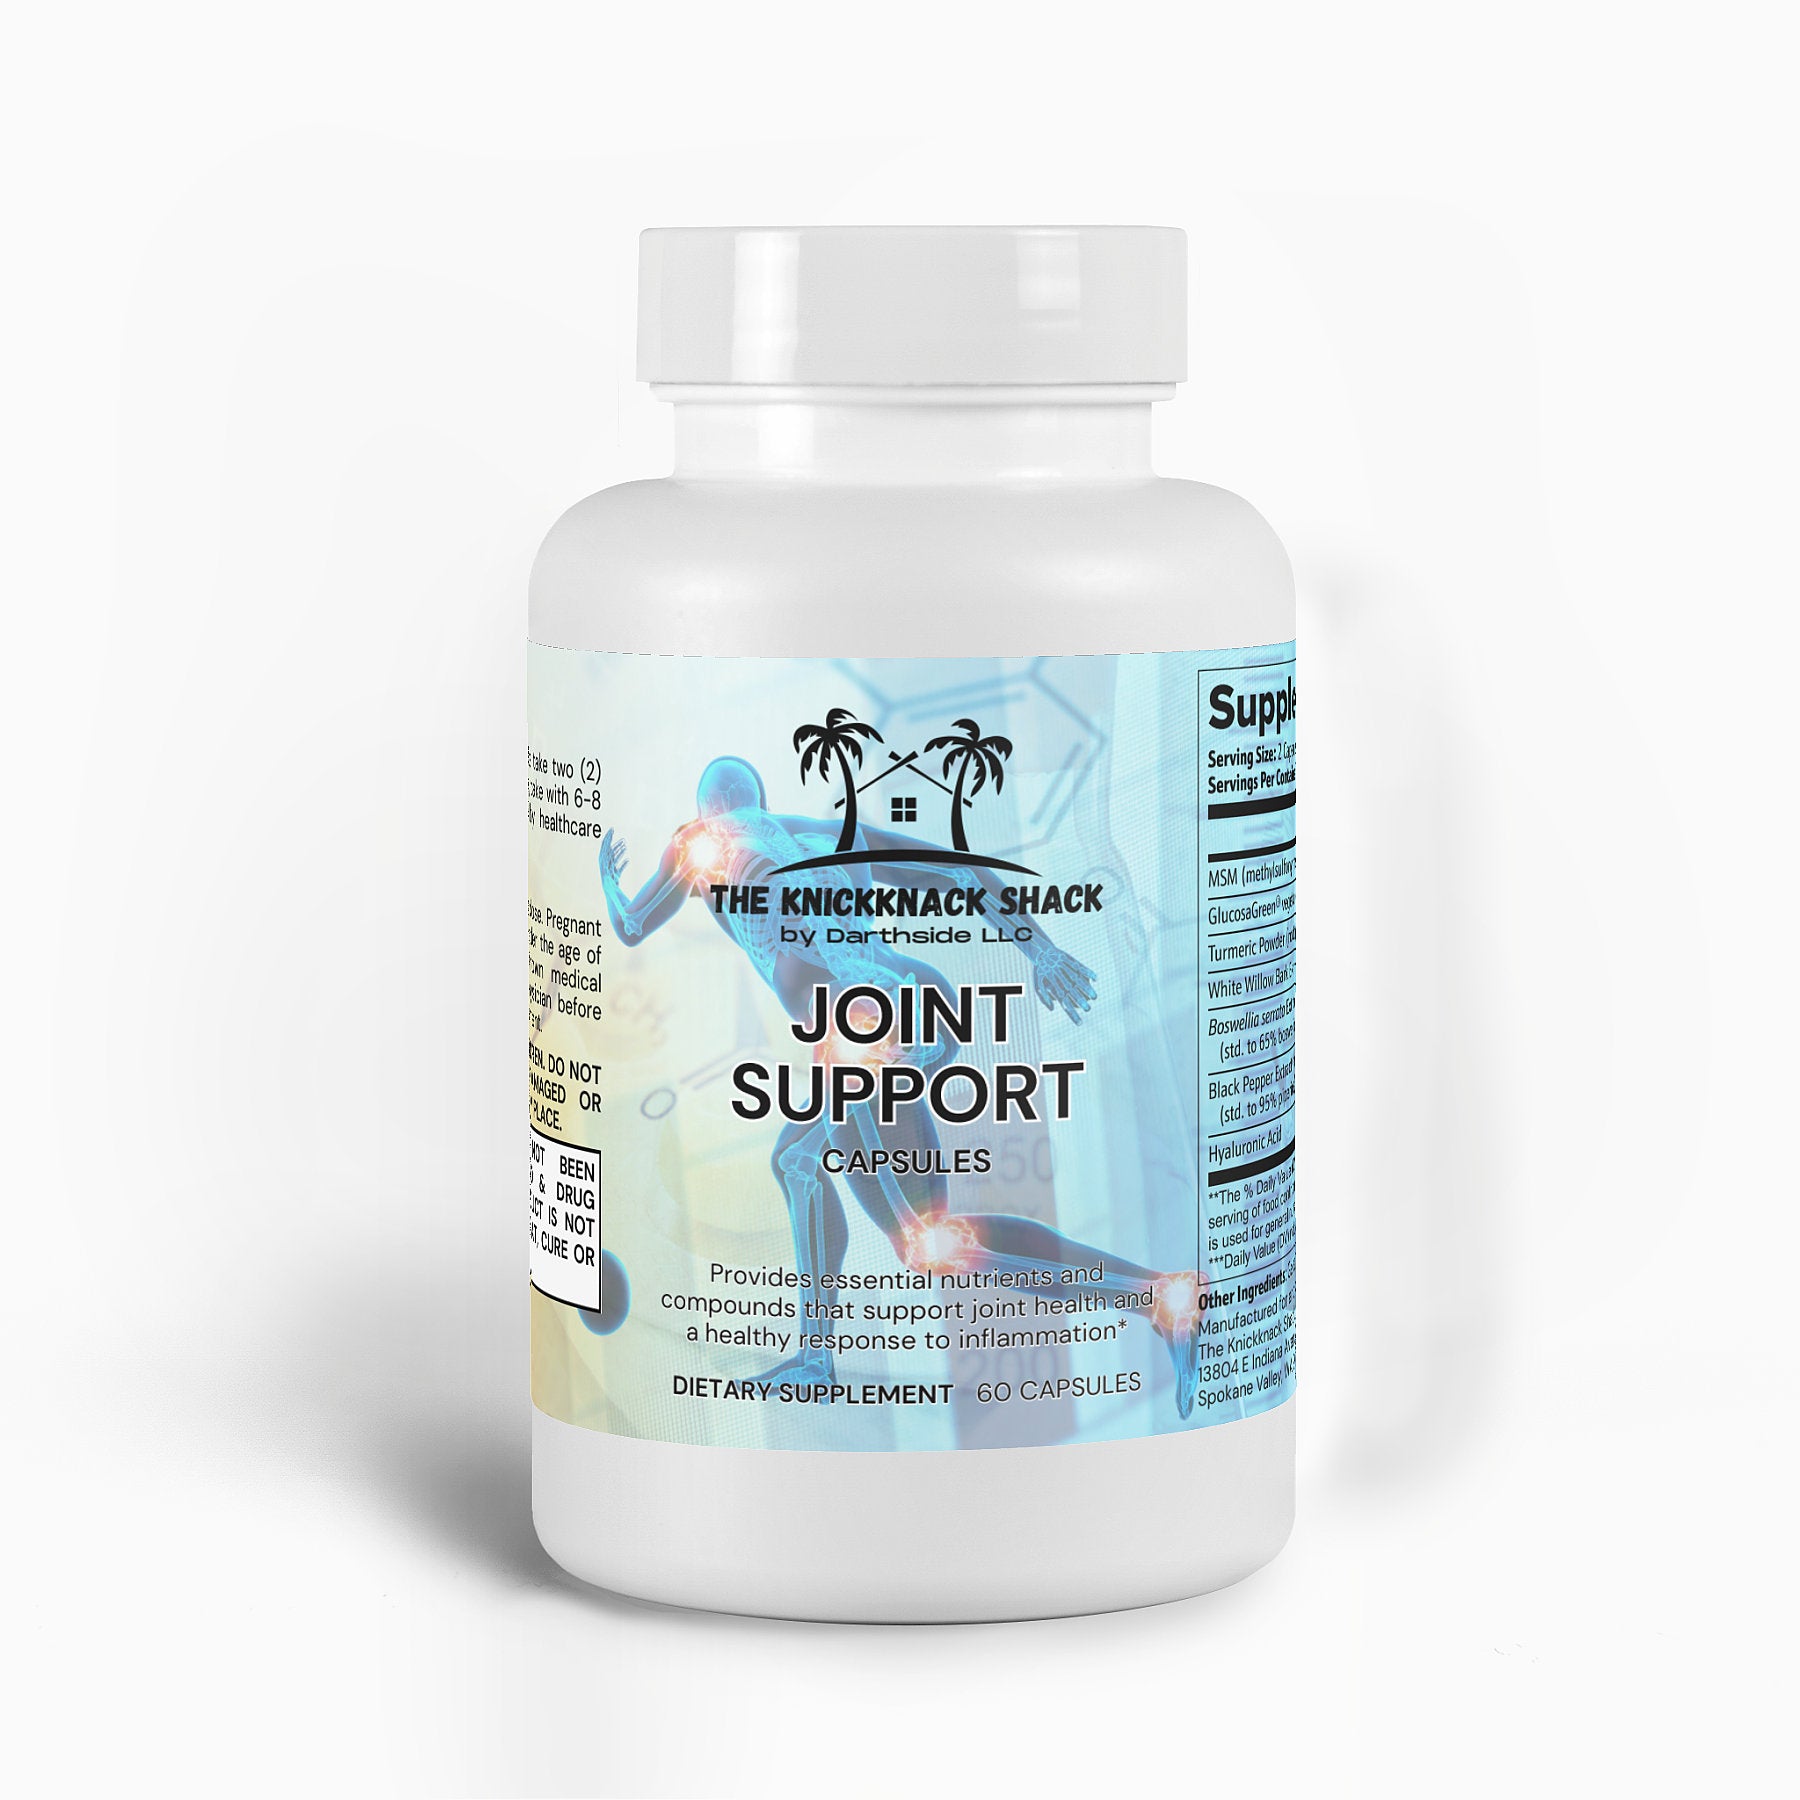 Joint Support Capsules